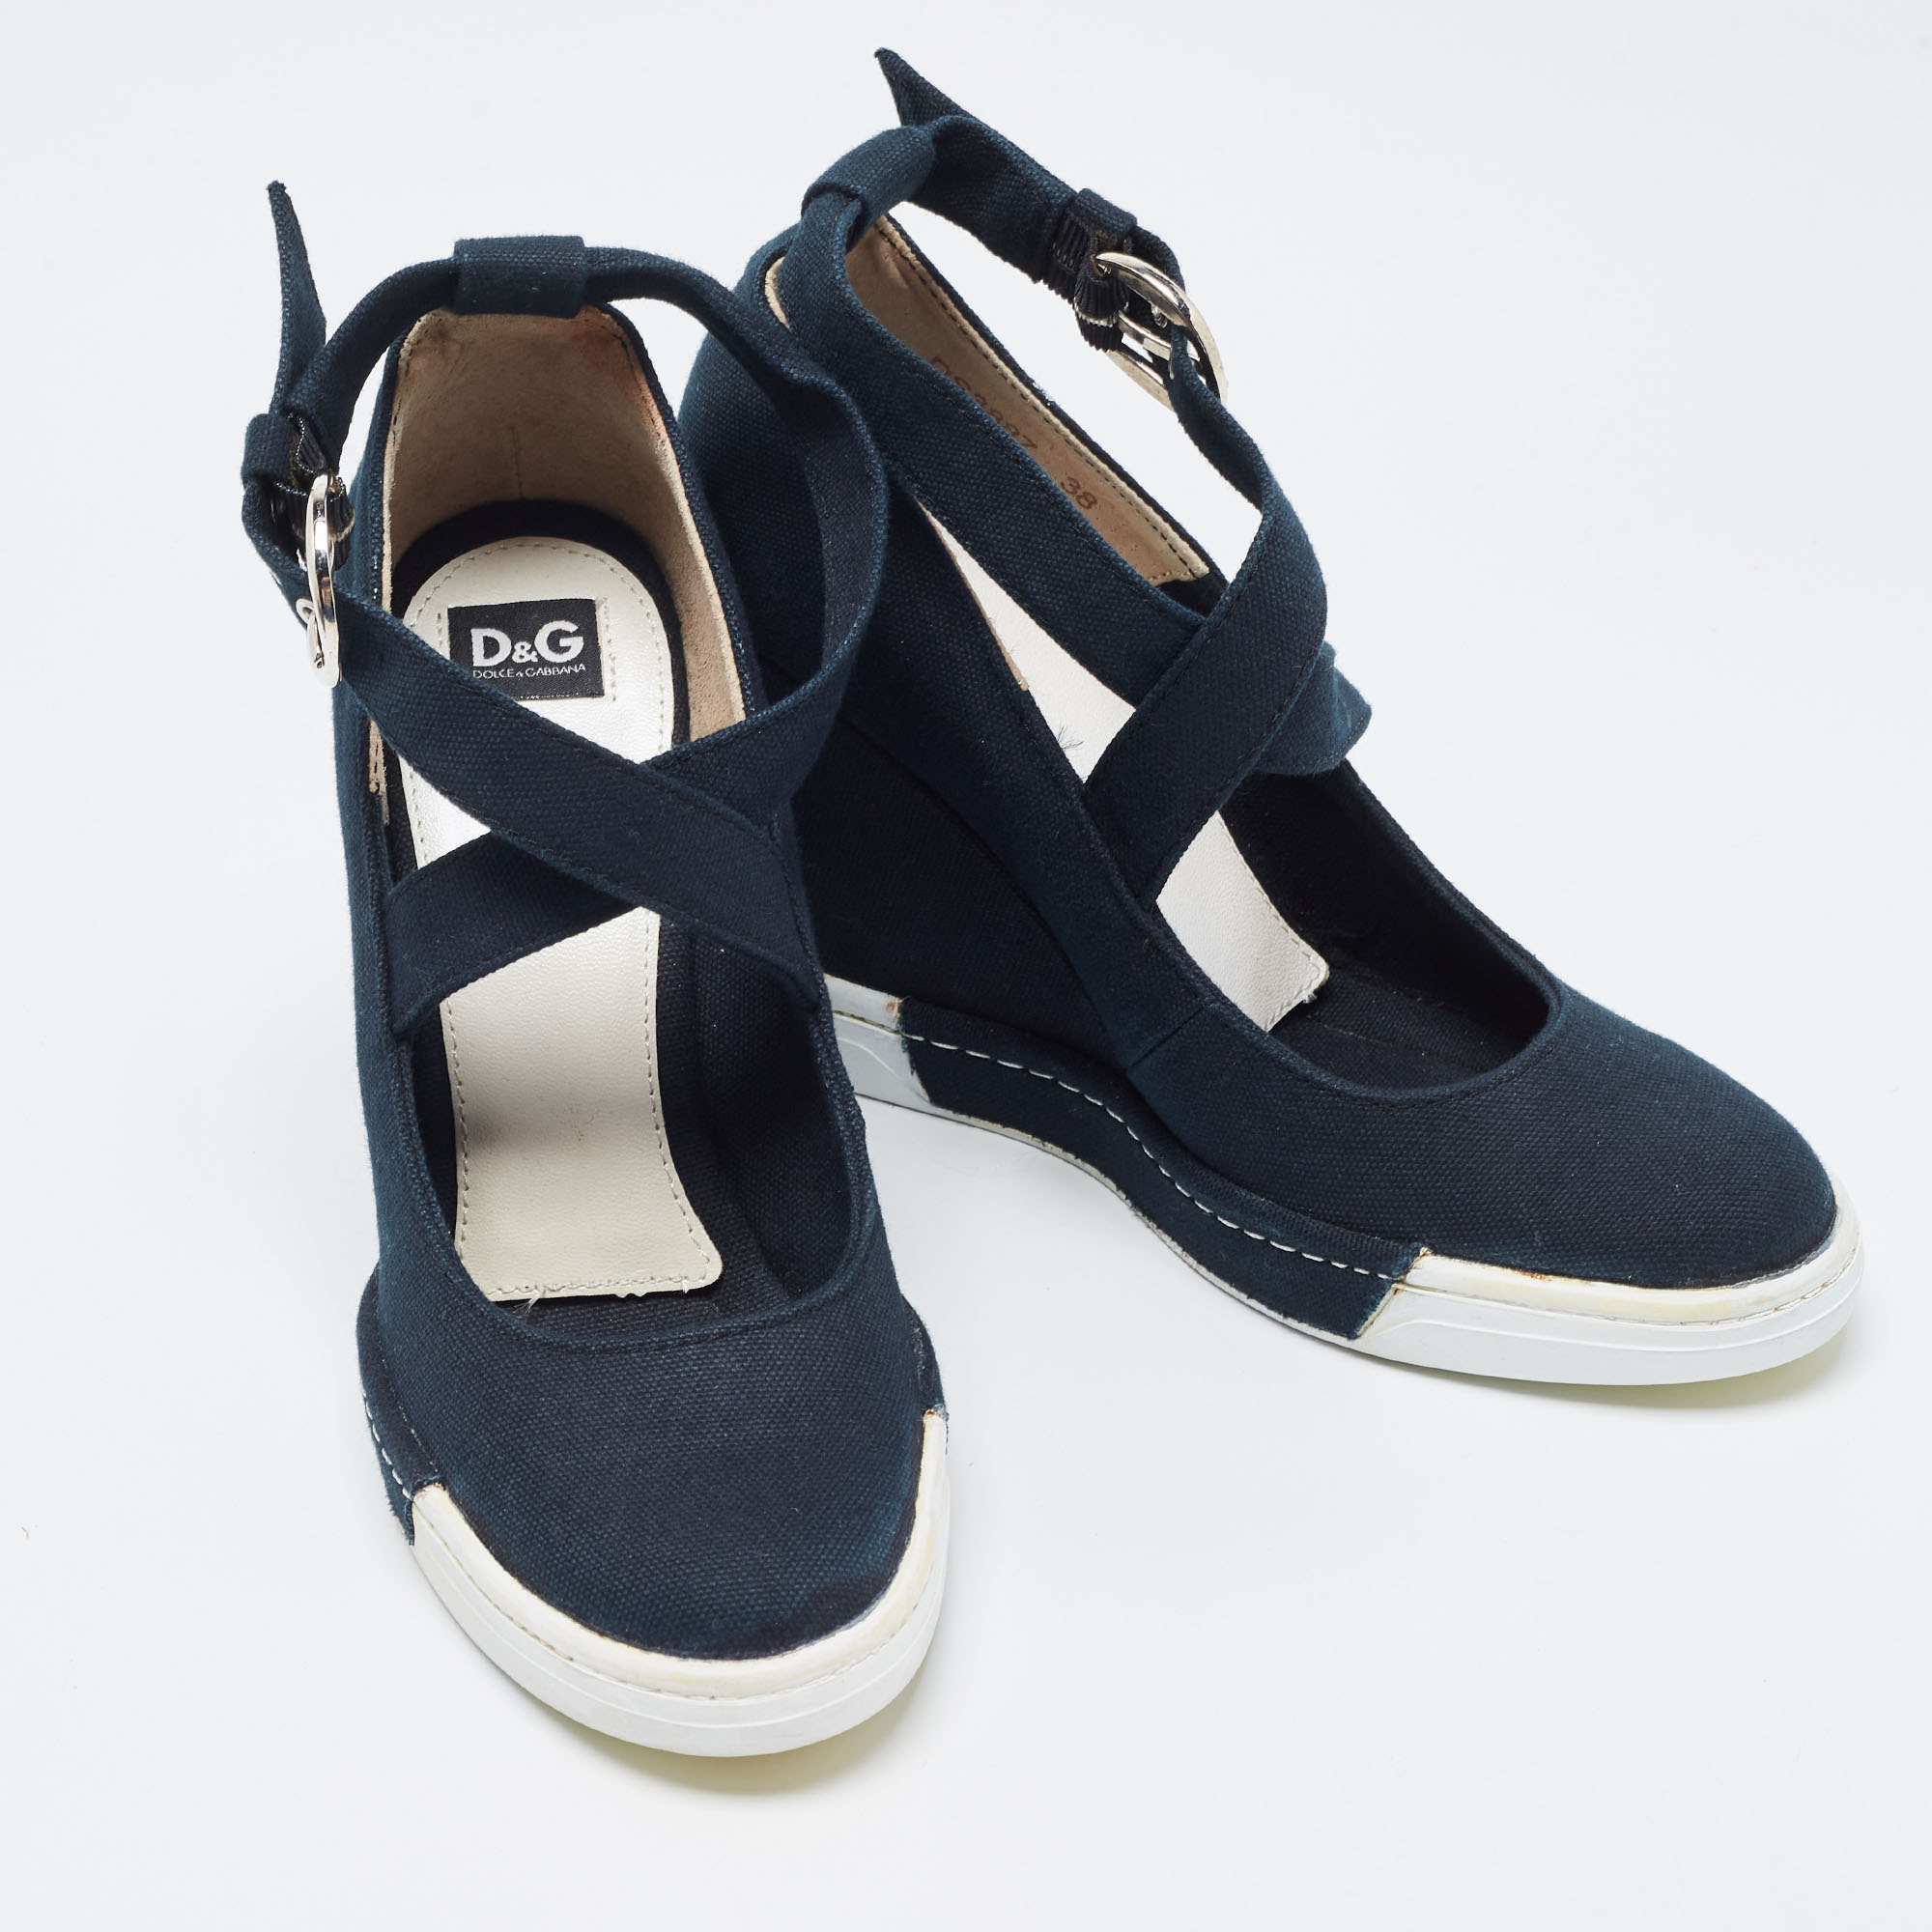 D&G Navy Blue Canvas Mary Jane Wedge Pumps Size 38